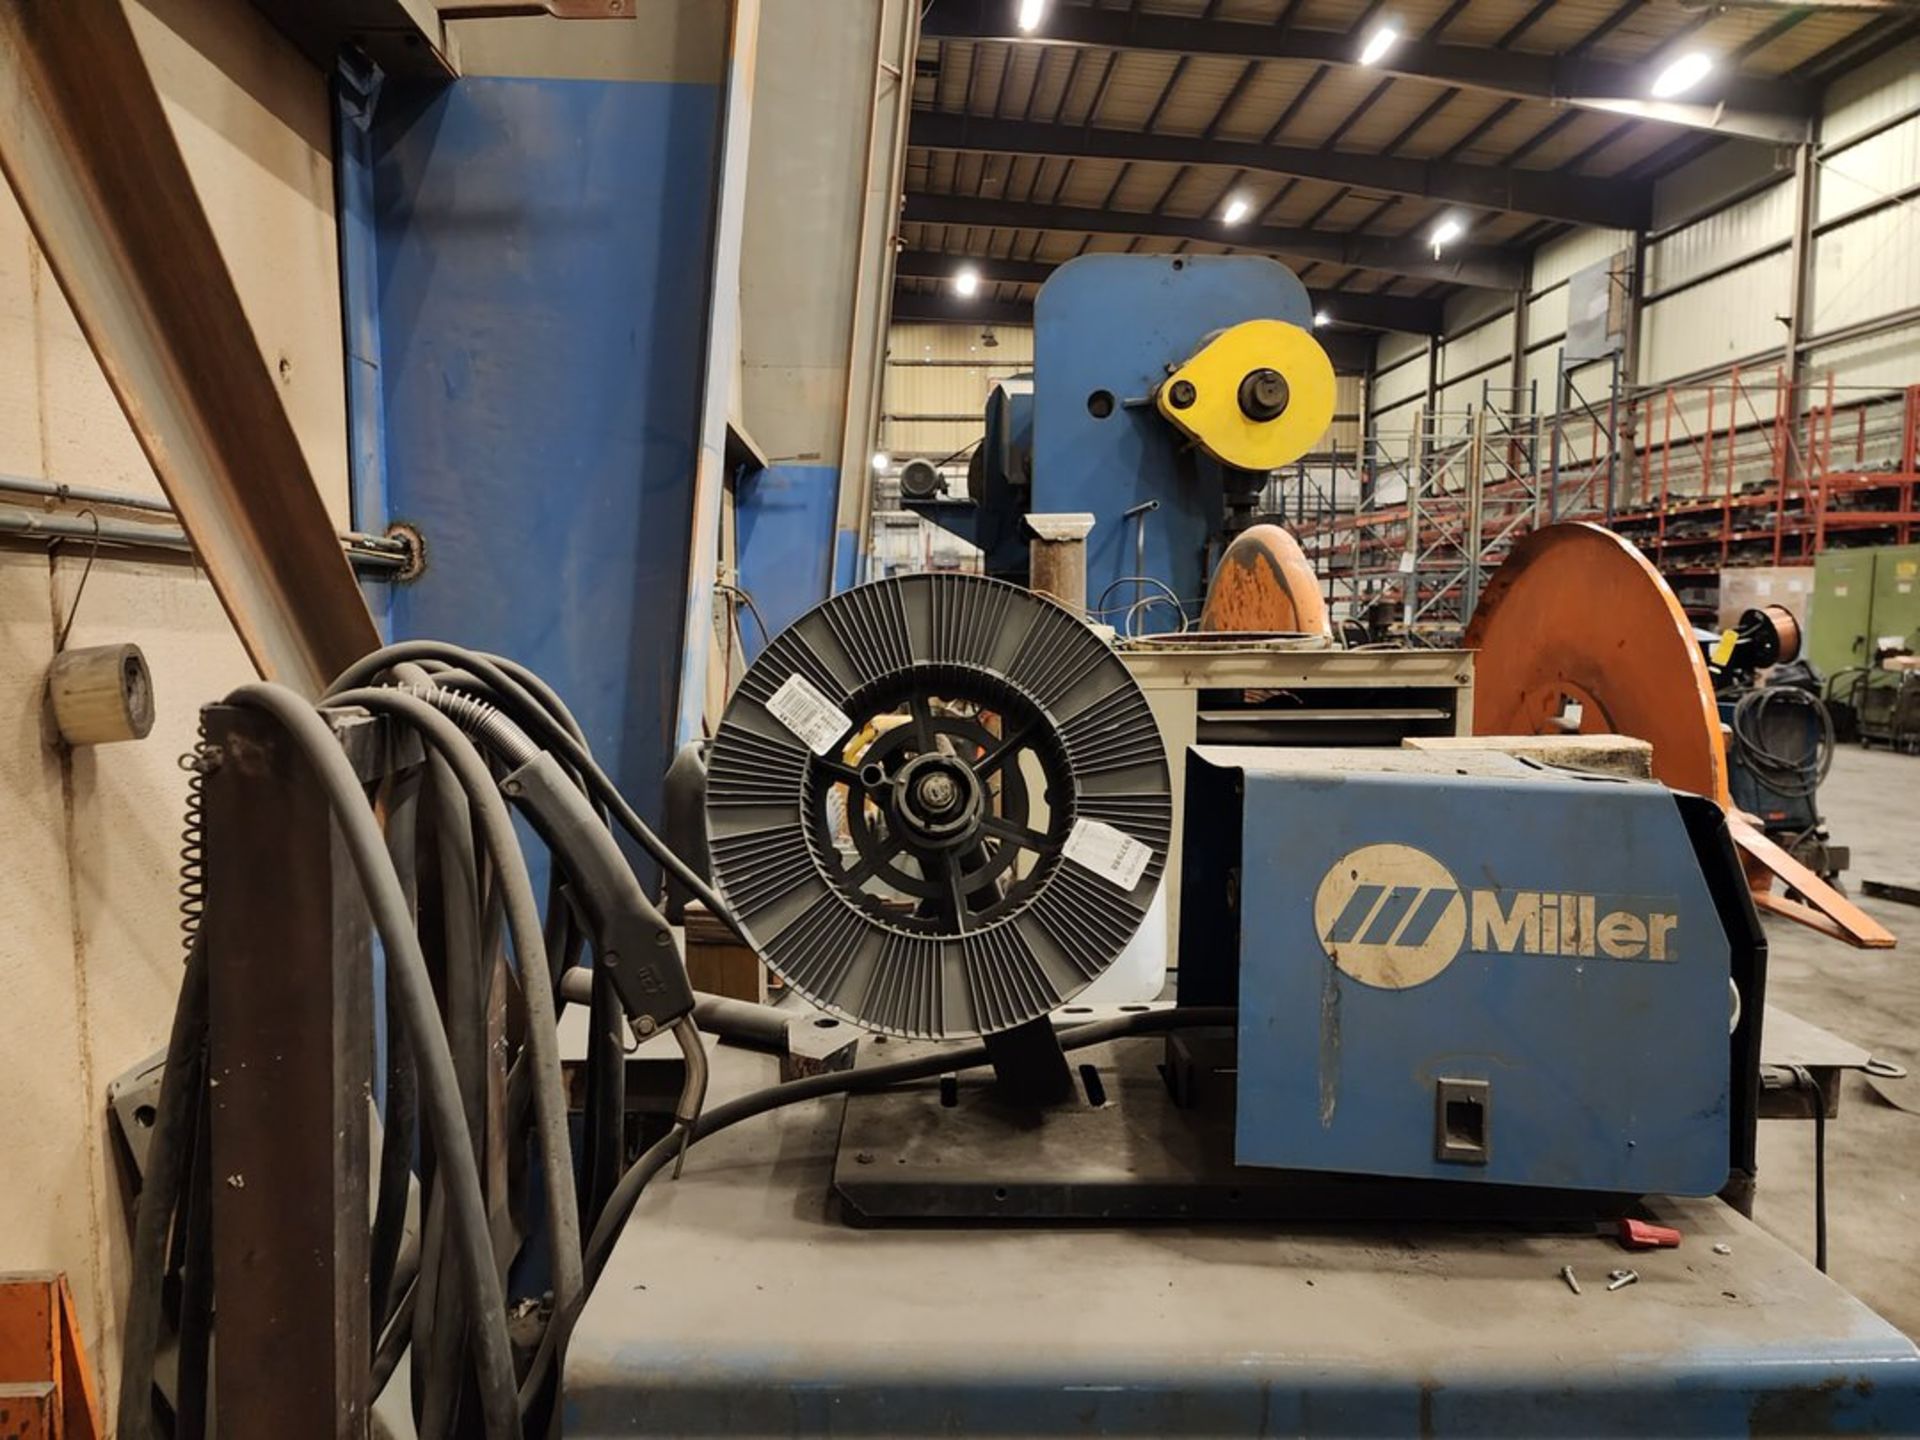 Miller CP302 Mig Welder (Parts Only) 200/230/460V, 38/33/16.5A, 12.3Kw, 3PH, 60hz; (No Tag) - Image 6 of 7